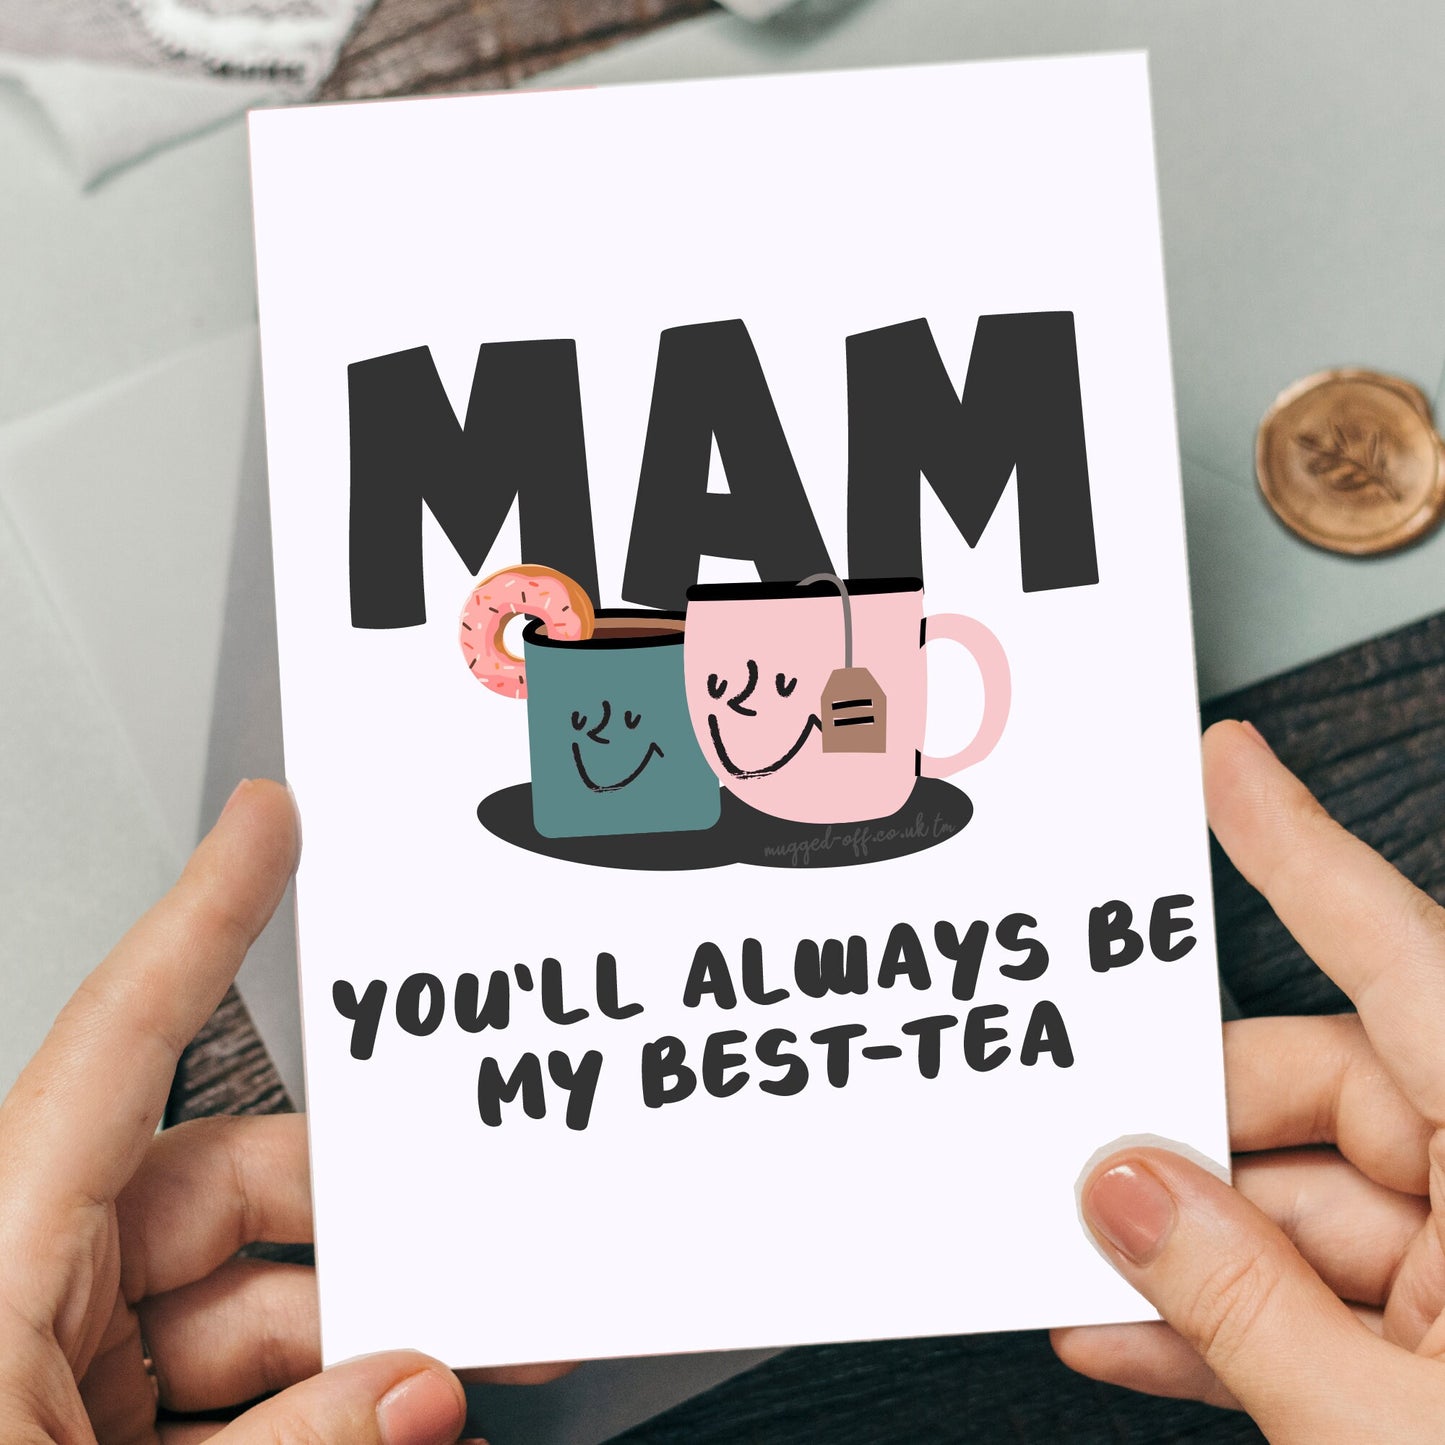 Mam Birthday Card, Funny Mam Birthday Card, From Son, Daughter, Funny Best Mother Card, Mam You'll Always Be My Best-tea Card mothers day card